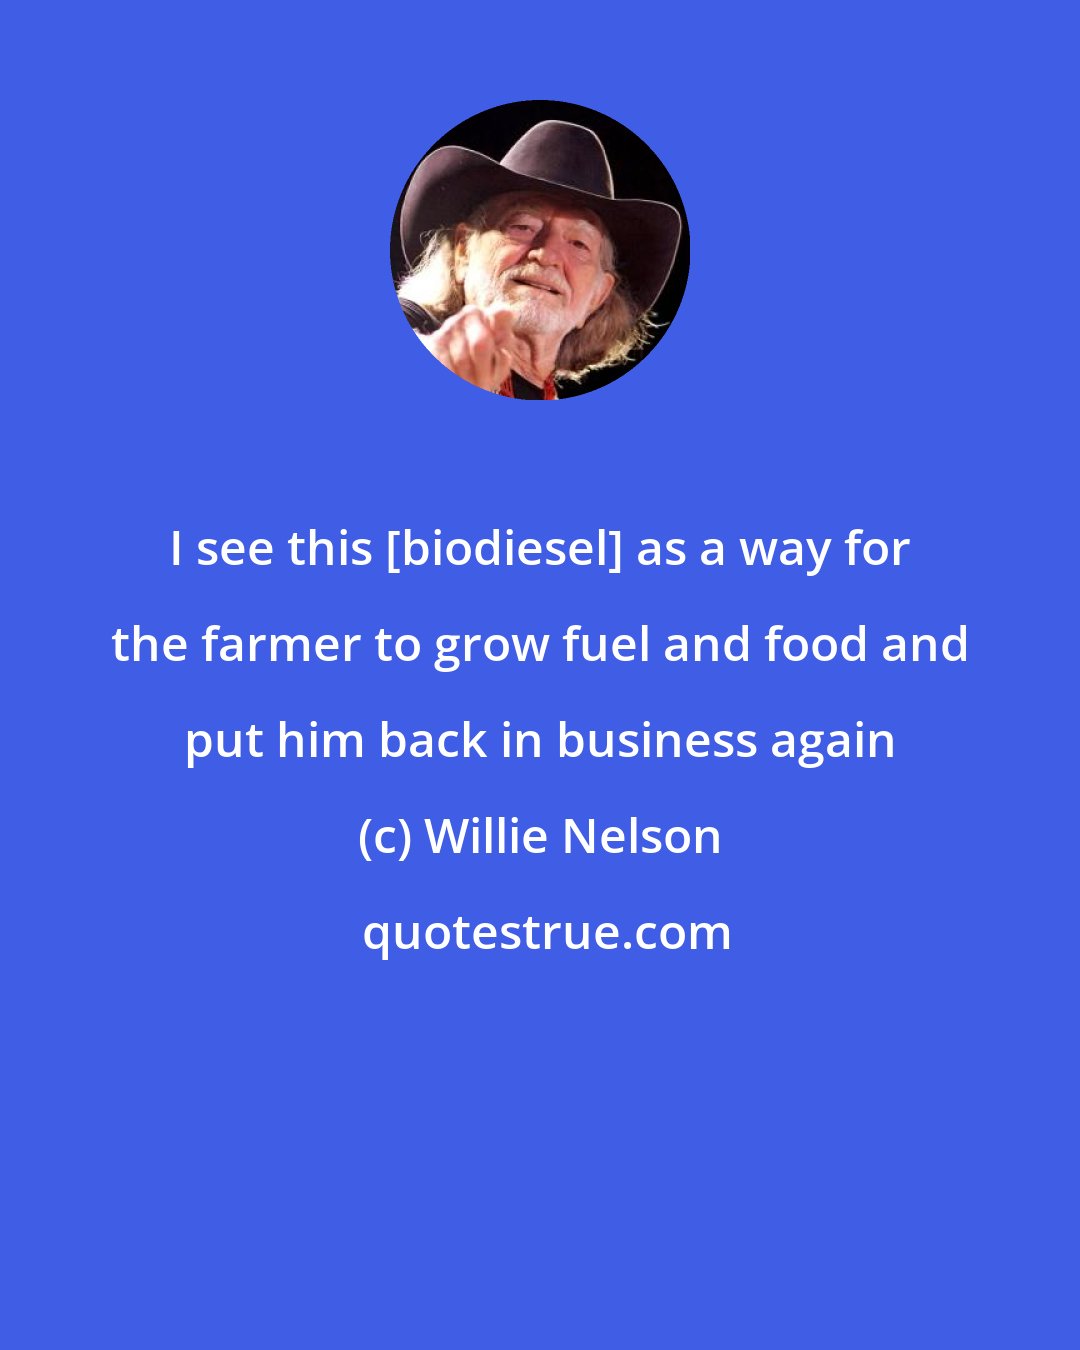 Willie Nelson: I see this [biodiesel] as a way for the farmer to grow fuel and food and put him back in business again